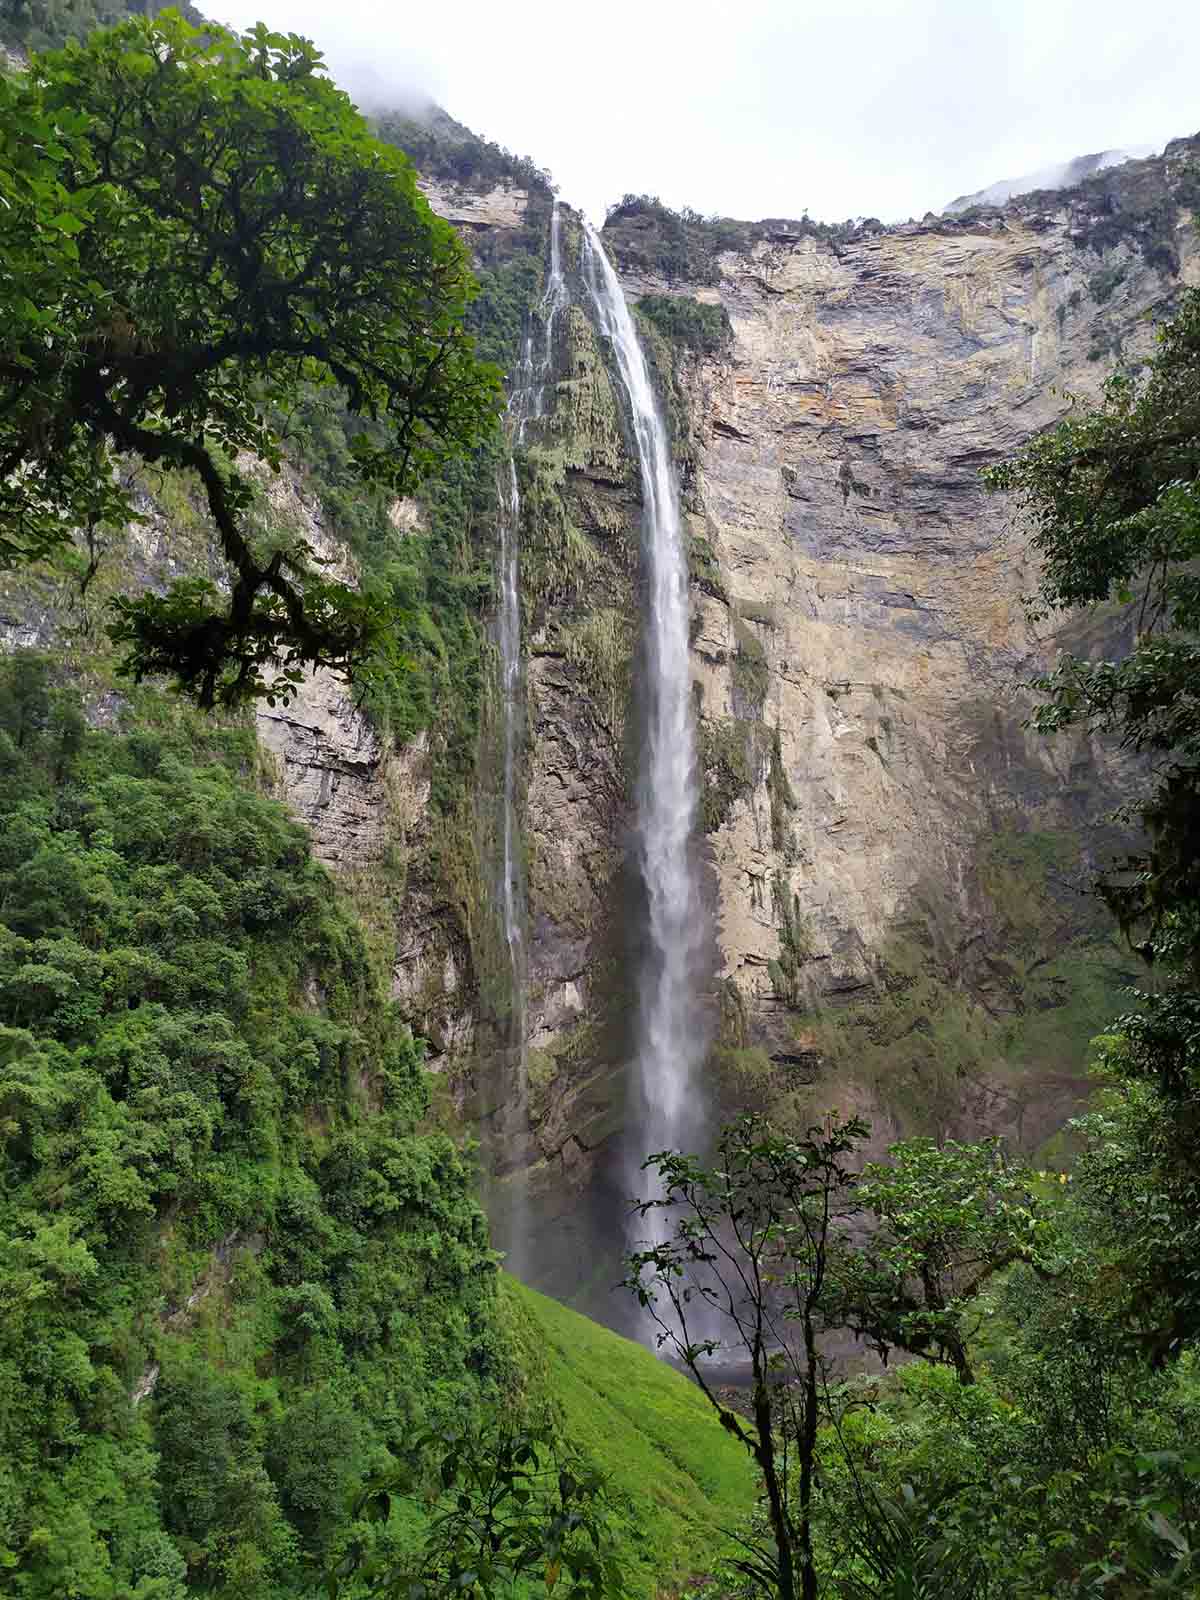 The Gocta Waterfall is a tall fall in the confluence of the Andes and Amazon.